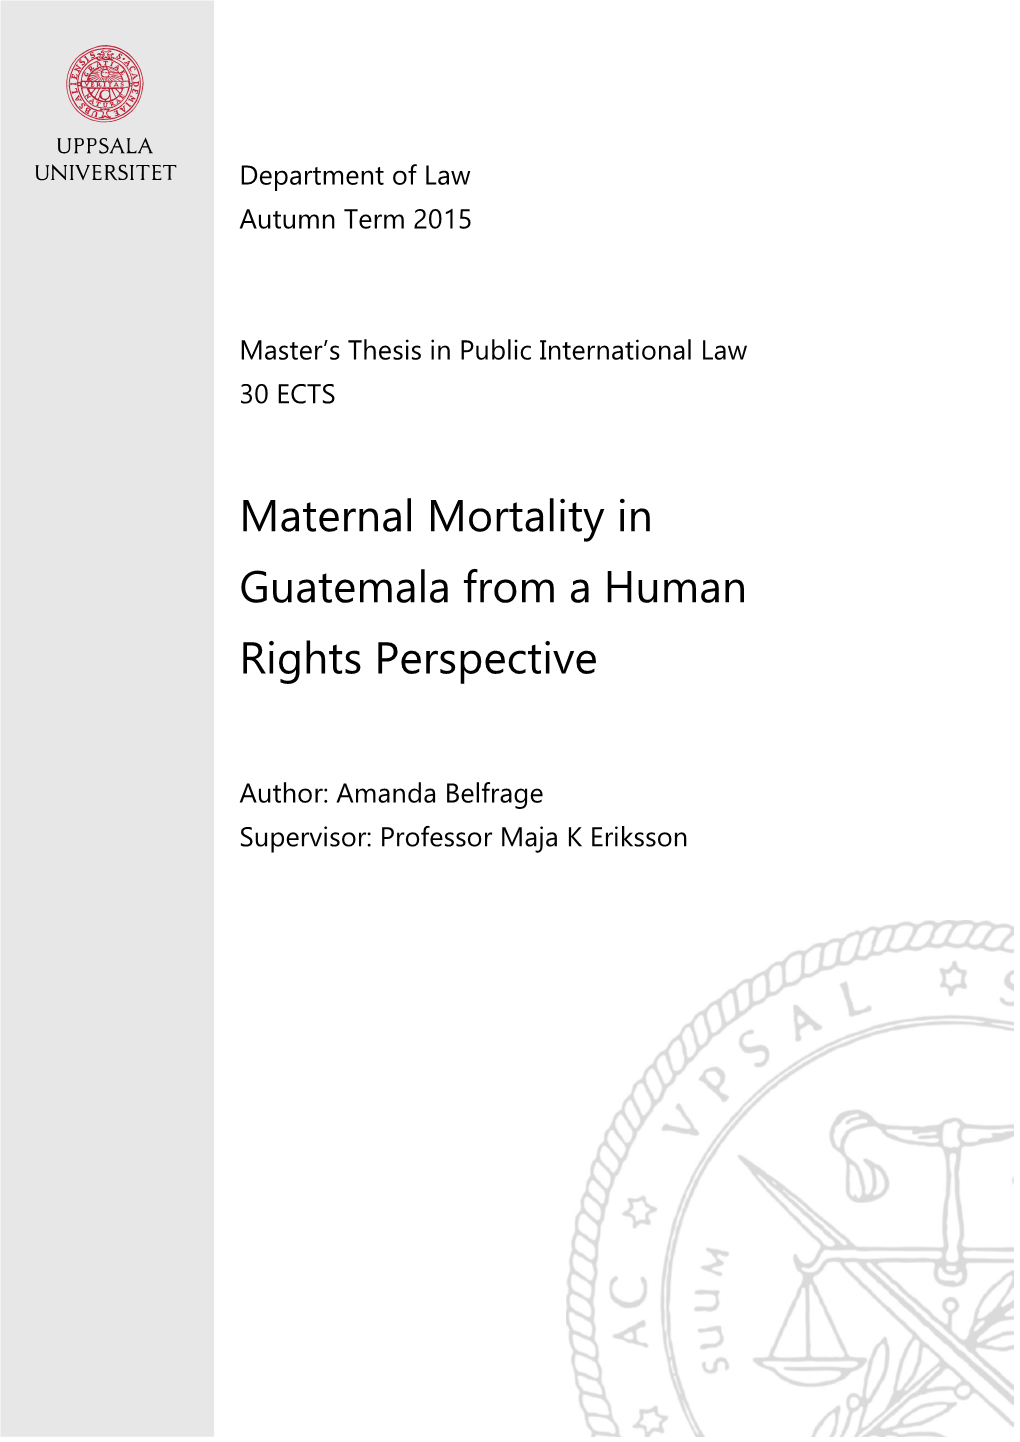 Maternal Mortality in Guatemala from a Human Rights Perspective